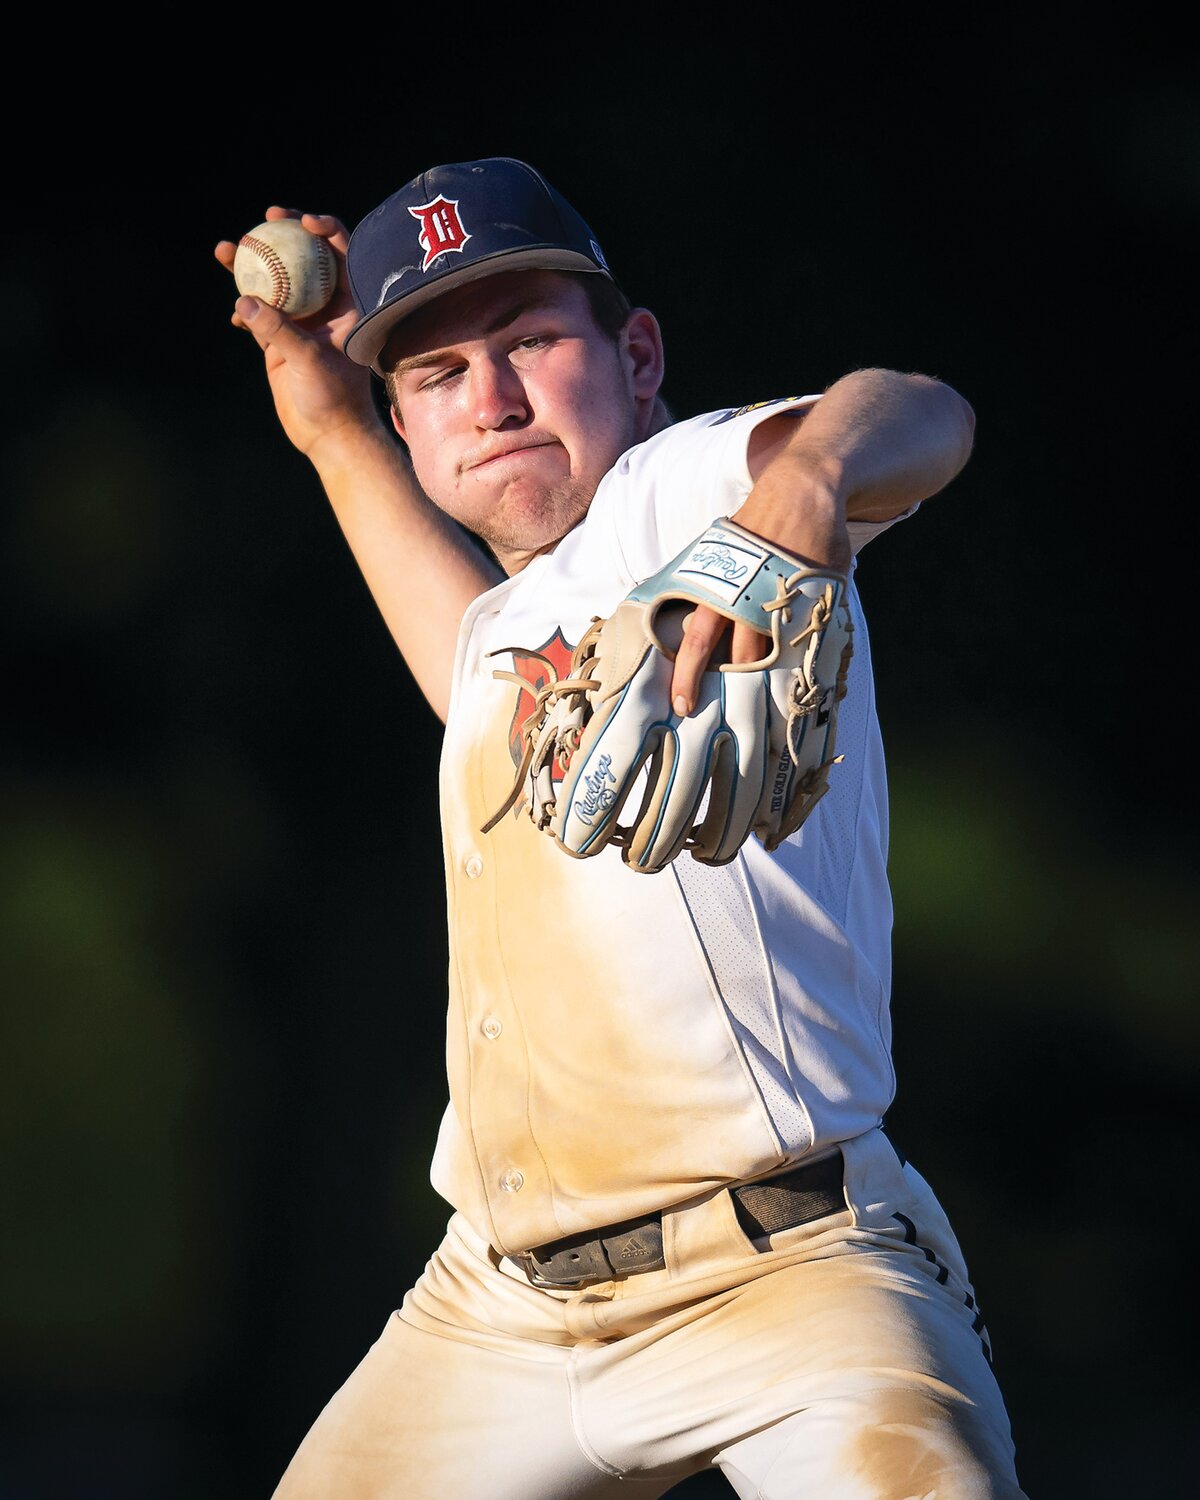 Doylestown’s Braden Borkowski came in to pitch the fifth inning, securing an 11-1 win.